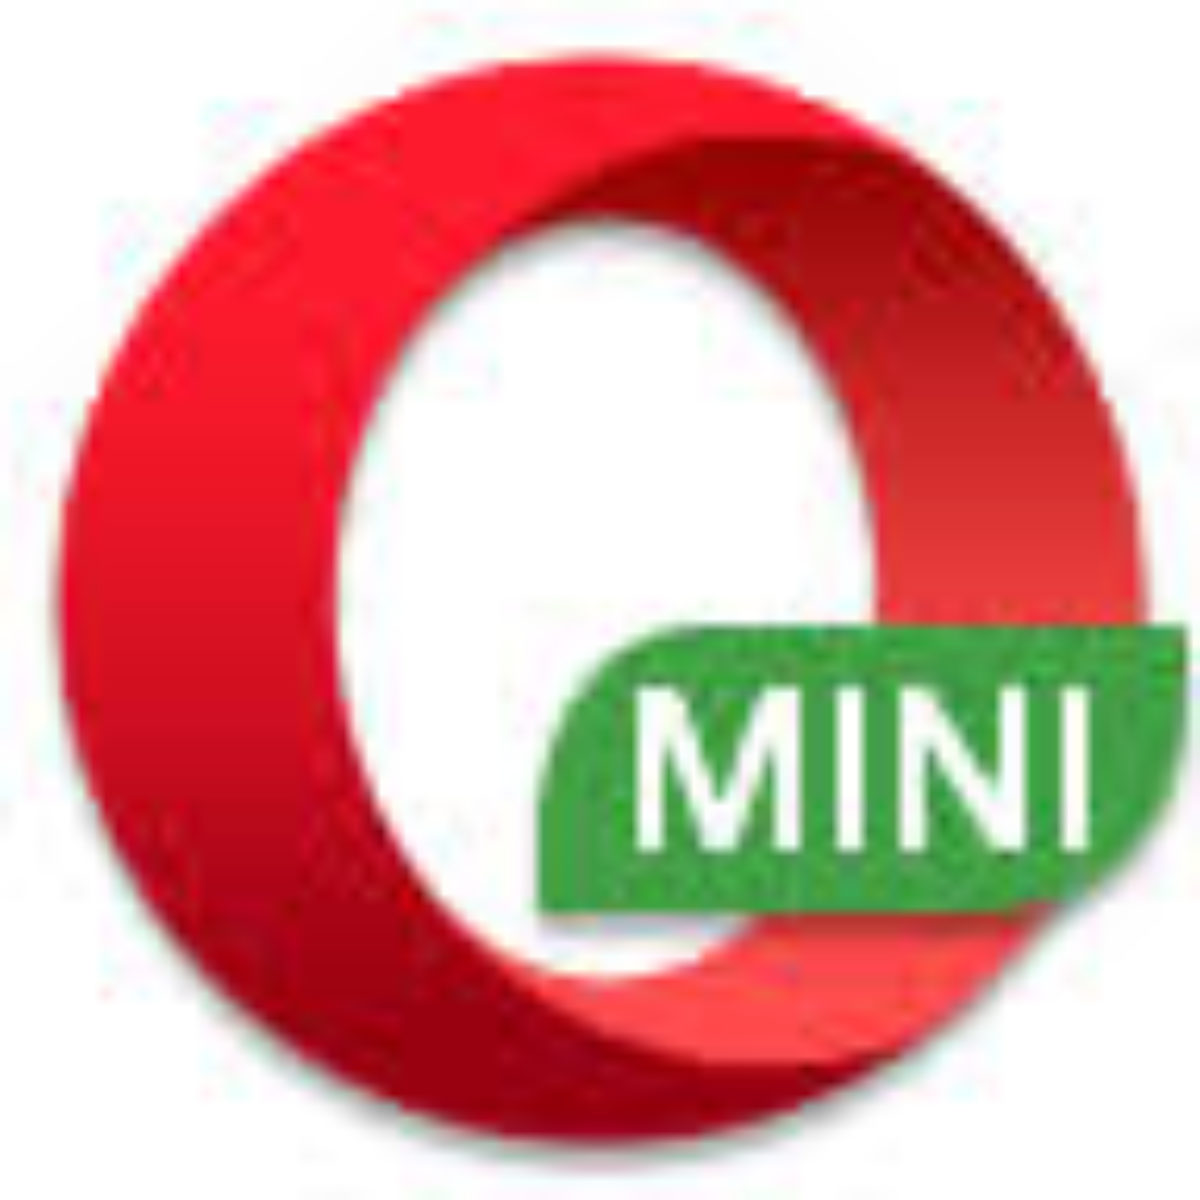 Opera Mini Apk 53 1 2254 55490 For Android Download